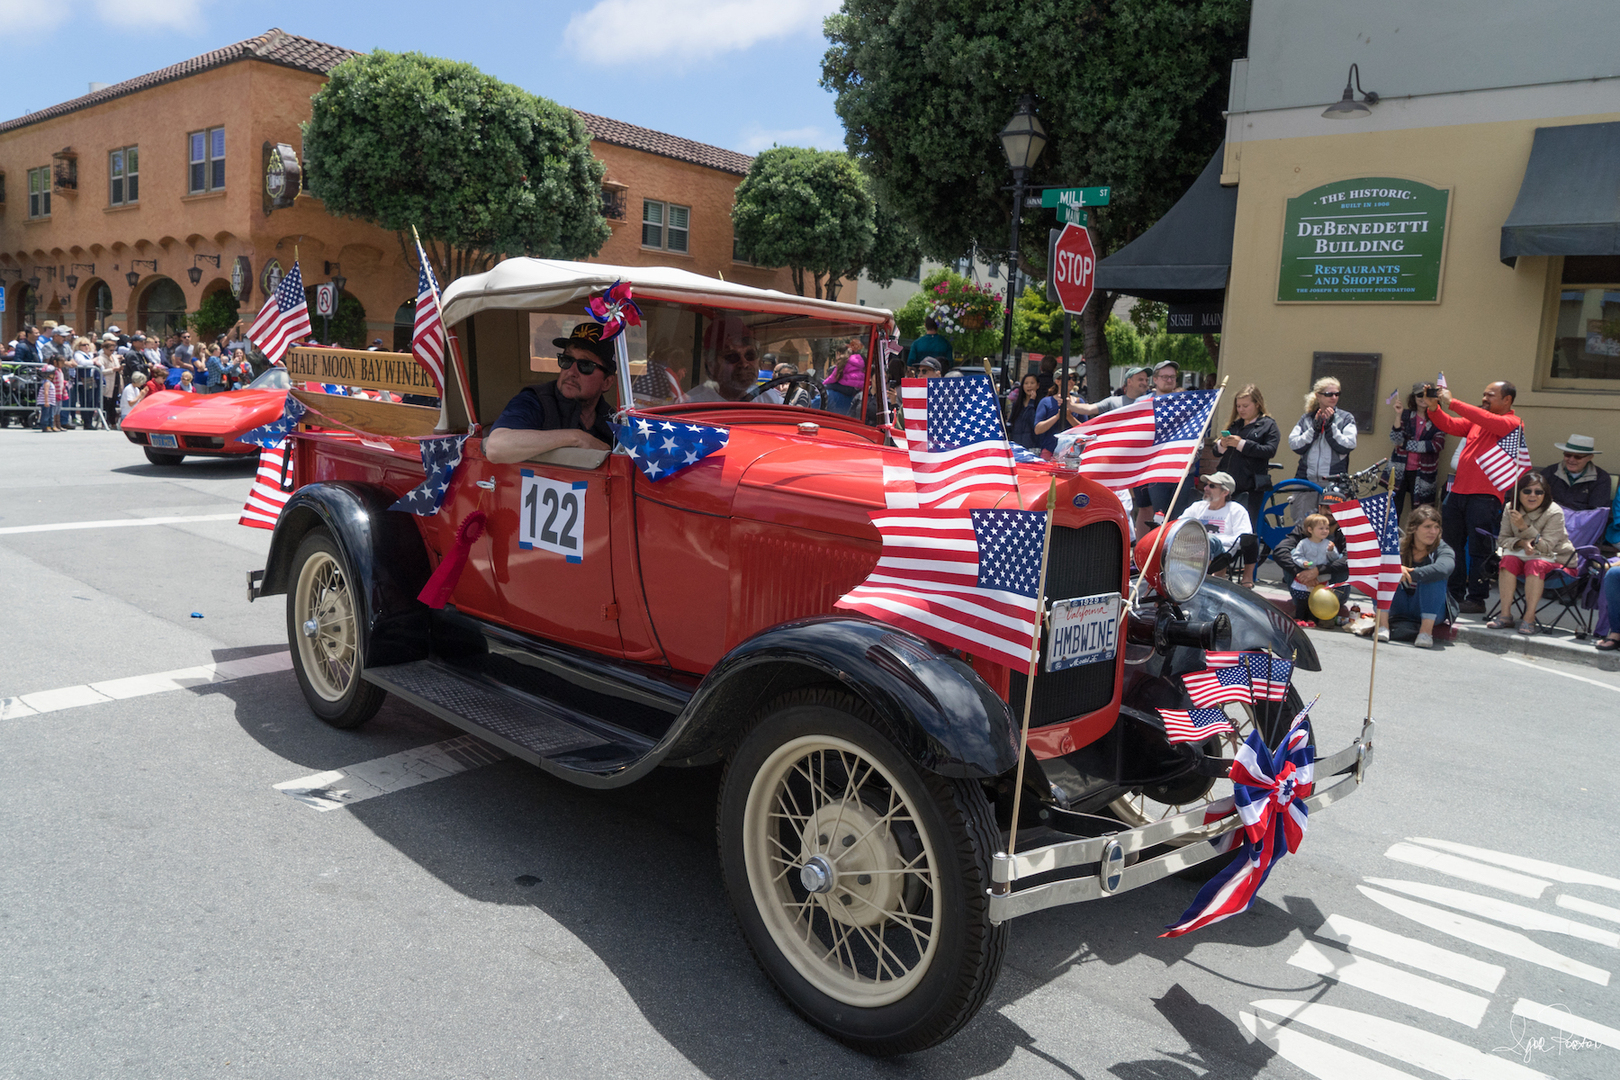 52nd Half Moon Bay Ol' Fashioned 4th of July Parade, Pancake Breakfast, Block Party and Festival, Half Moon Bay, California, United States